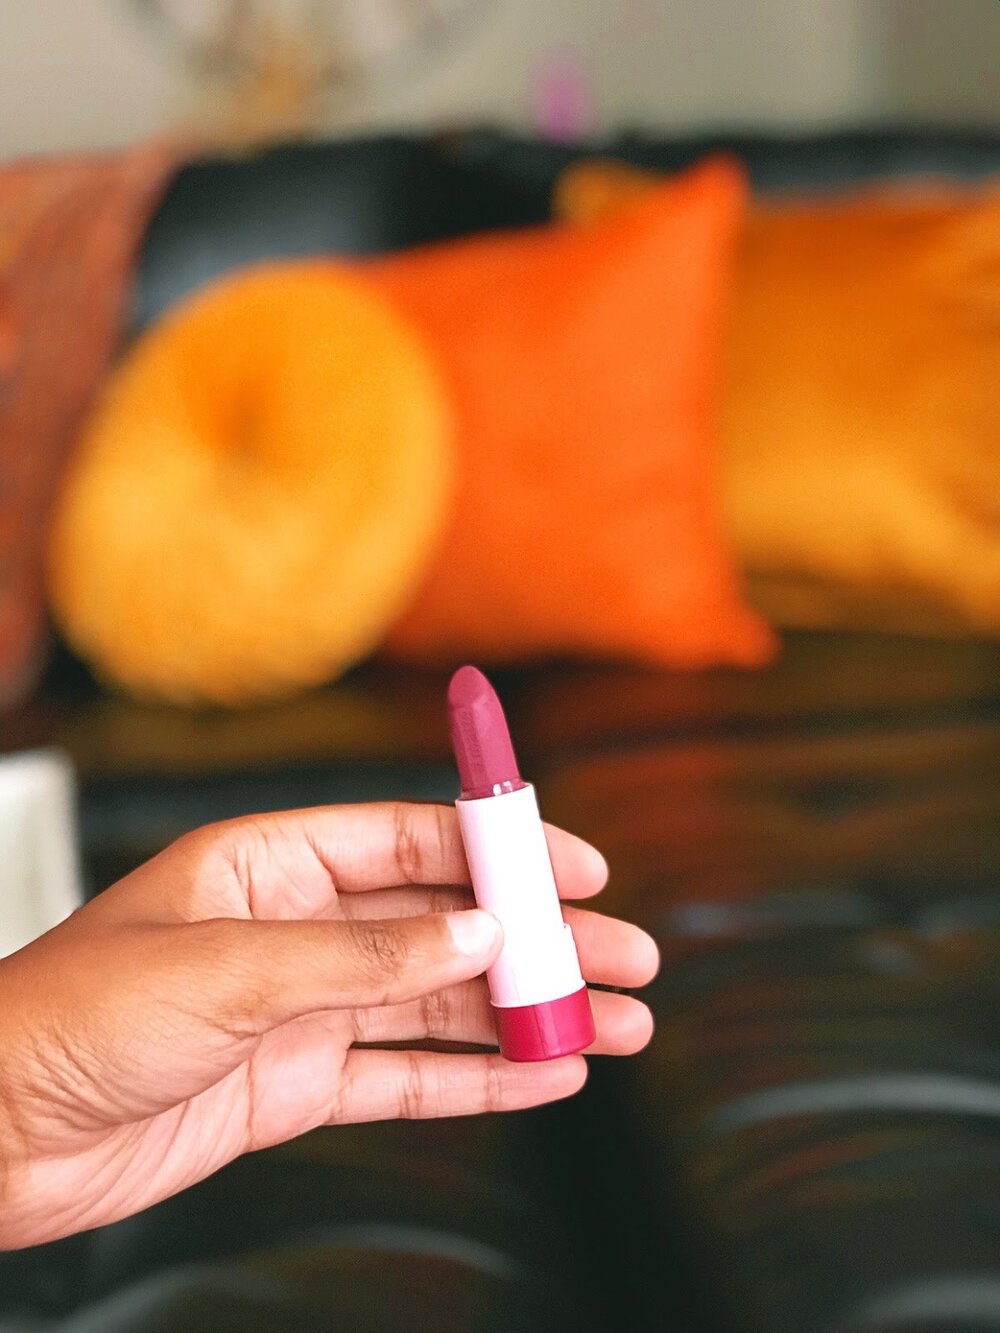 The Best Lipstick, New Makeup Brushes, And The Best Lip Chap For Dry Lips!